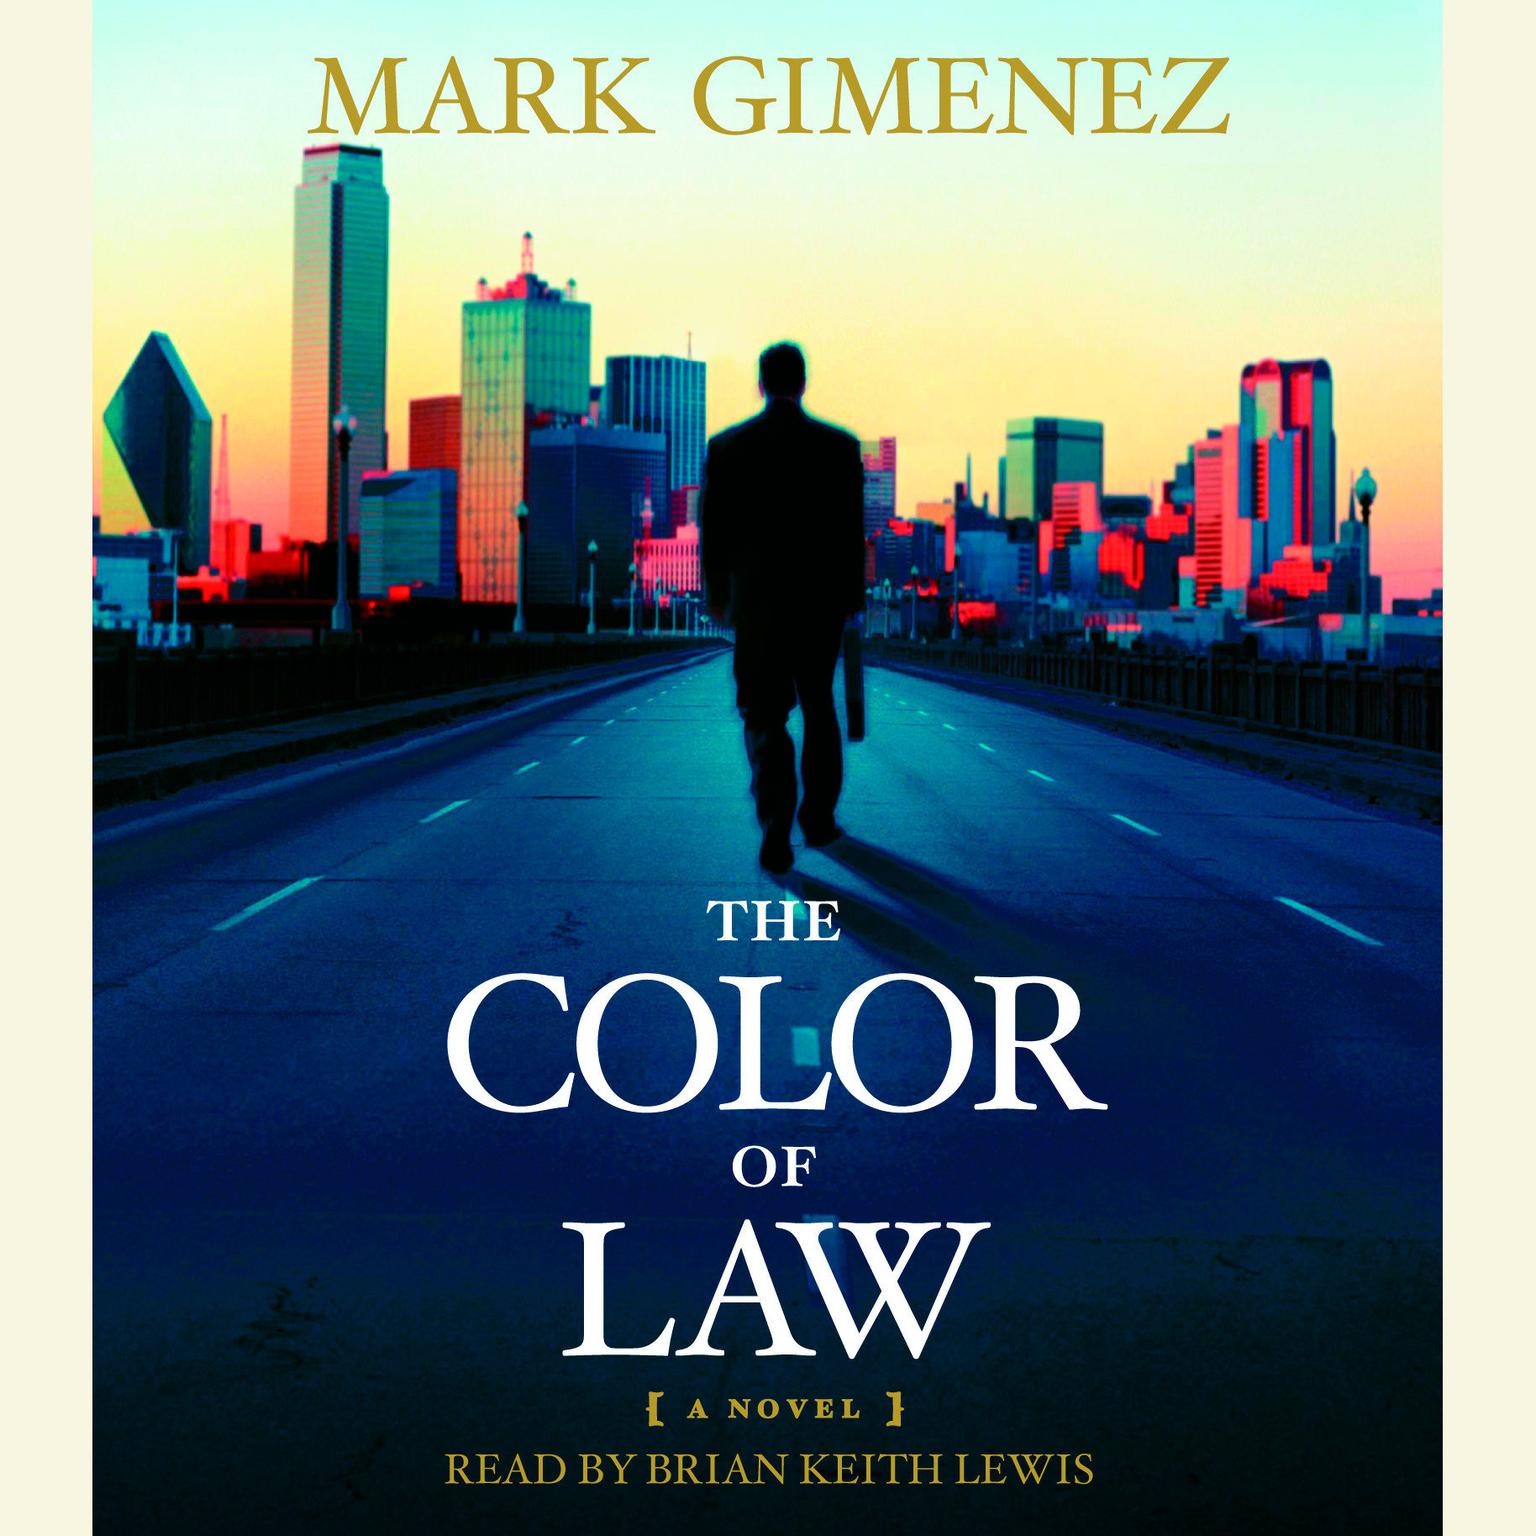 The Color of Law (Abridged): A Novel Audiobook, by Mark Gimenez